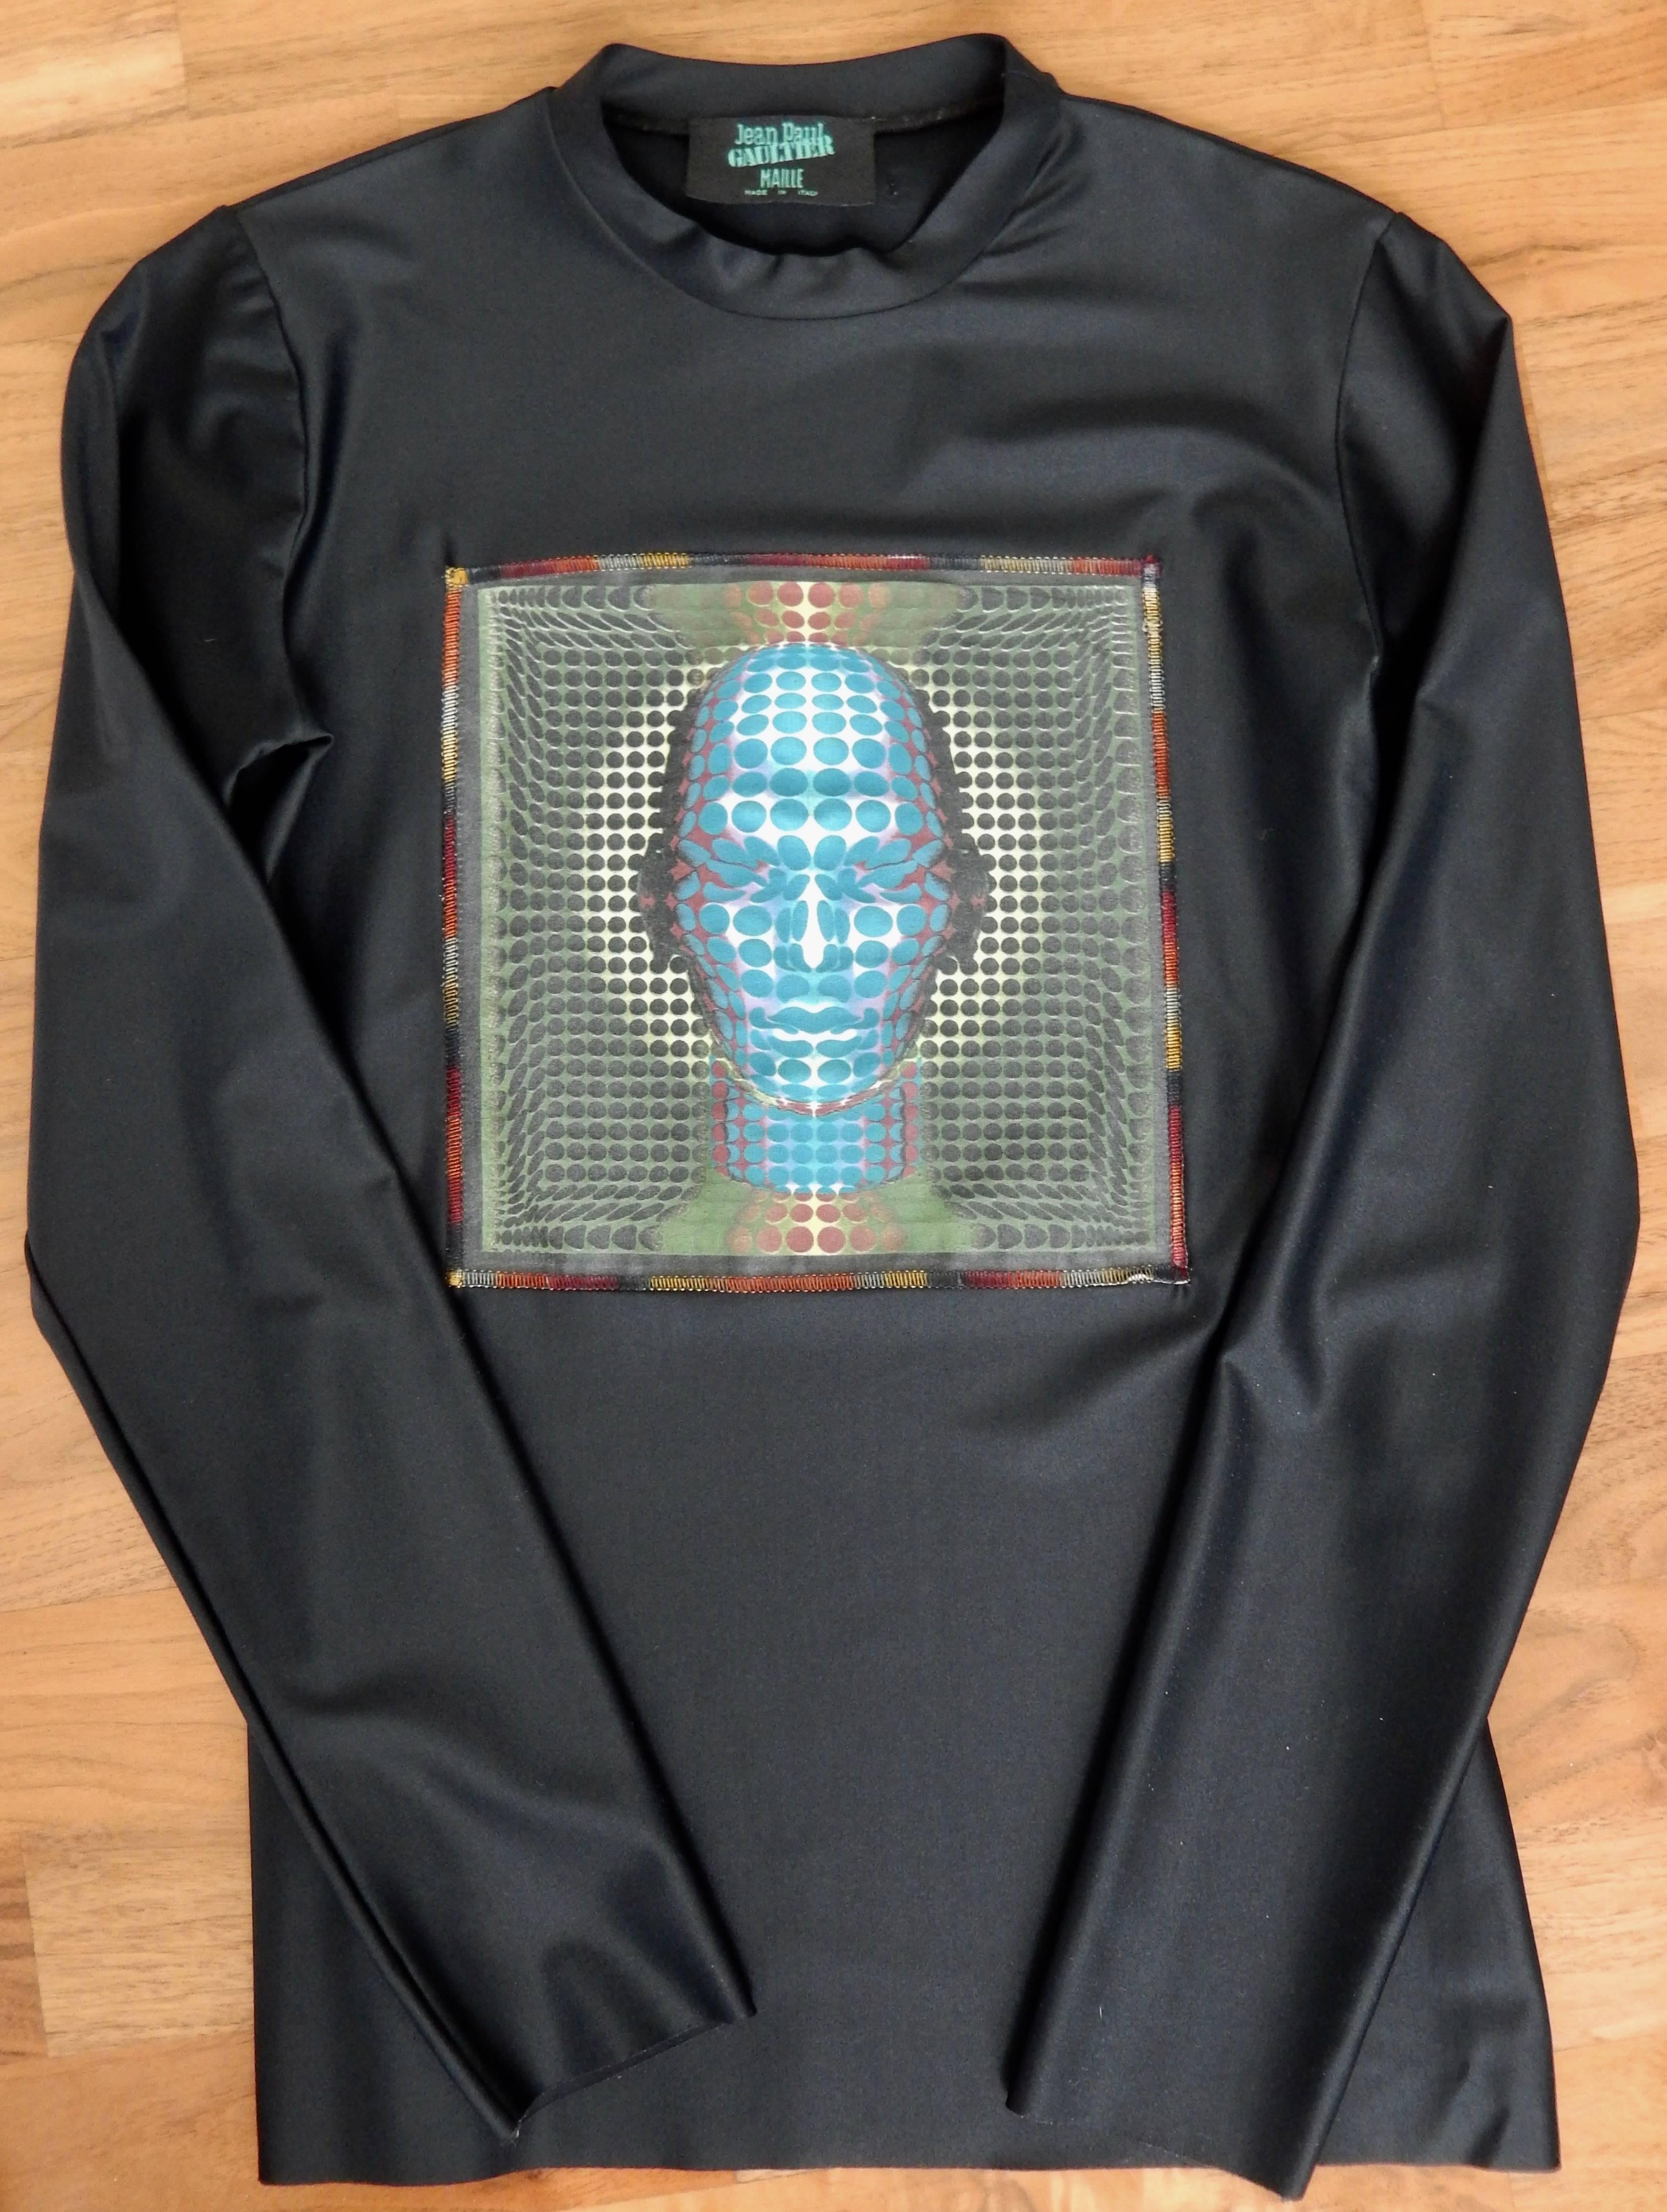 A nylon and spandex shirt by the avant-garde designer Jean Paul Gaultier.   Reminiscent of the artwork of Vasarely, the design for this collection was inspired by the 1979 Sci-Fi film Mad Max.  Though designed in 1995, Gaultier's futuristic 